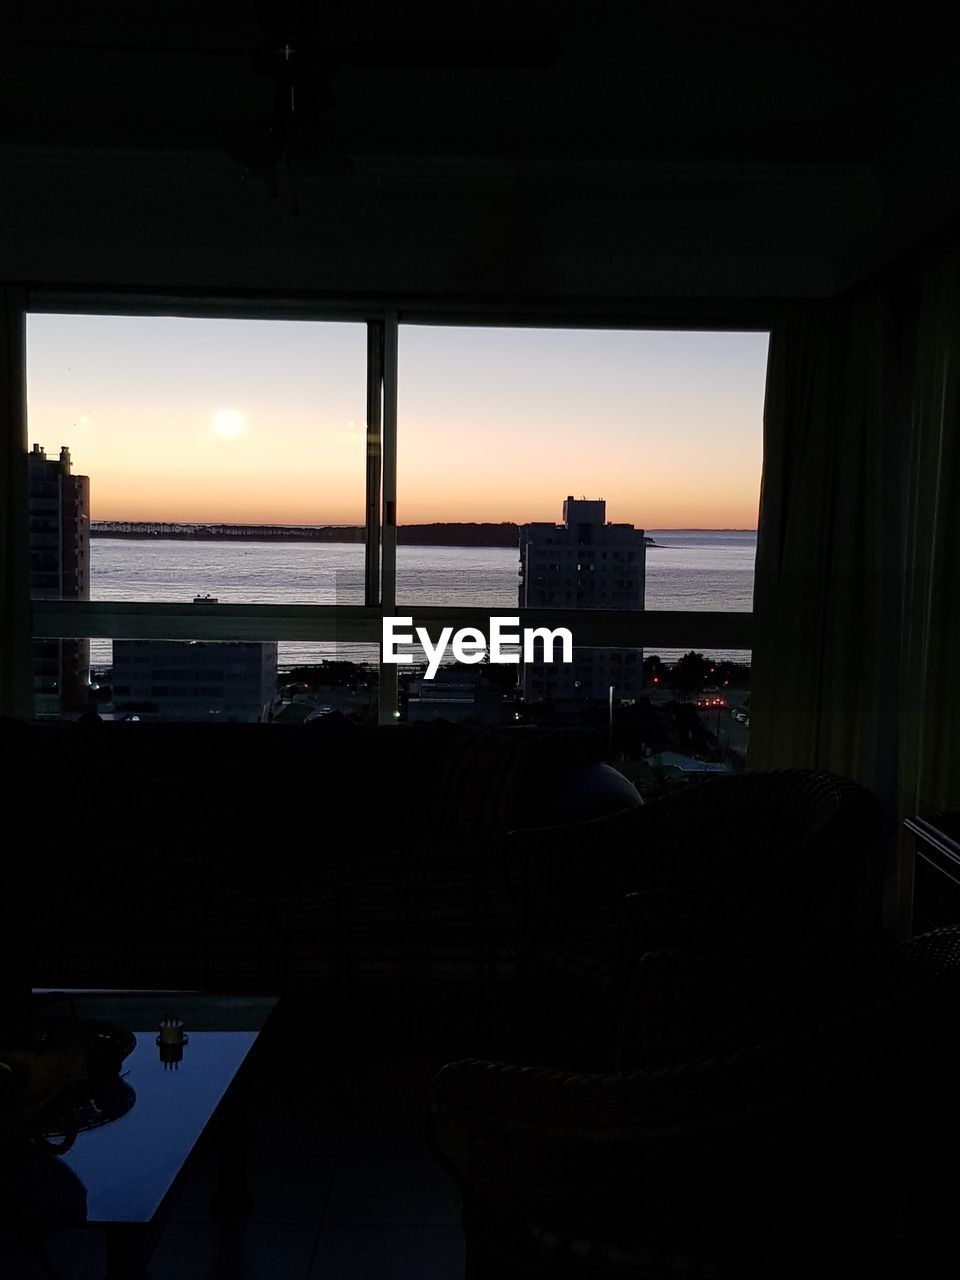 SCENIC VIEW OF SEA SEEN THROUGH WINDOW DURING SUNSET